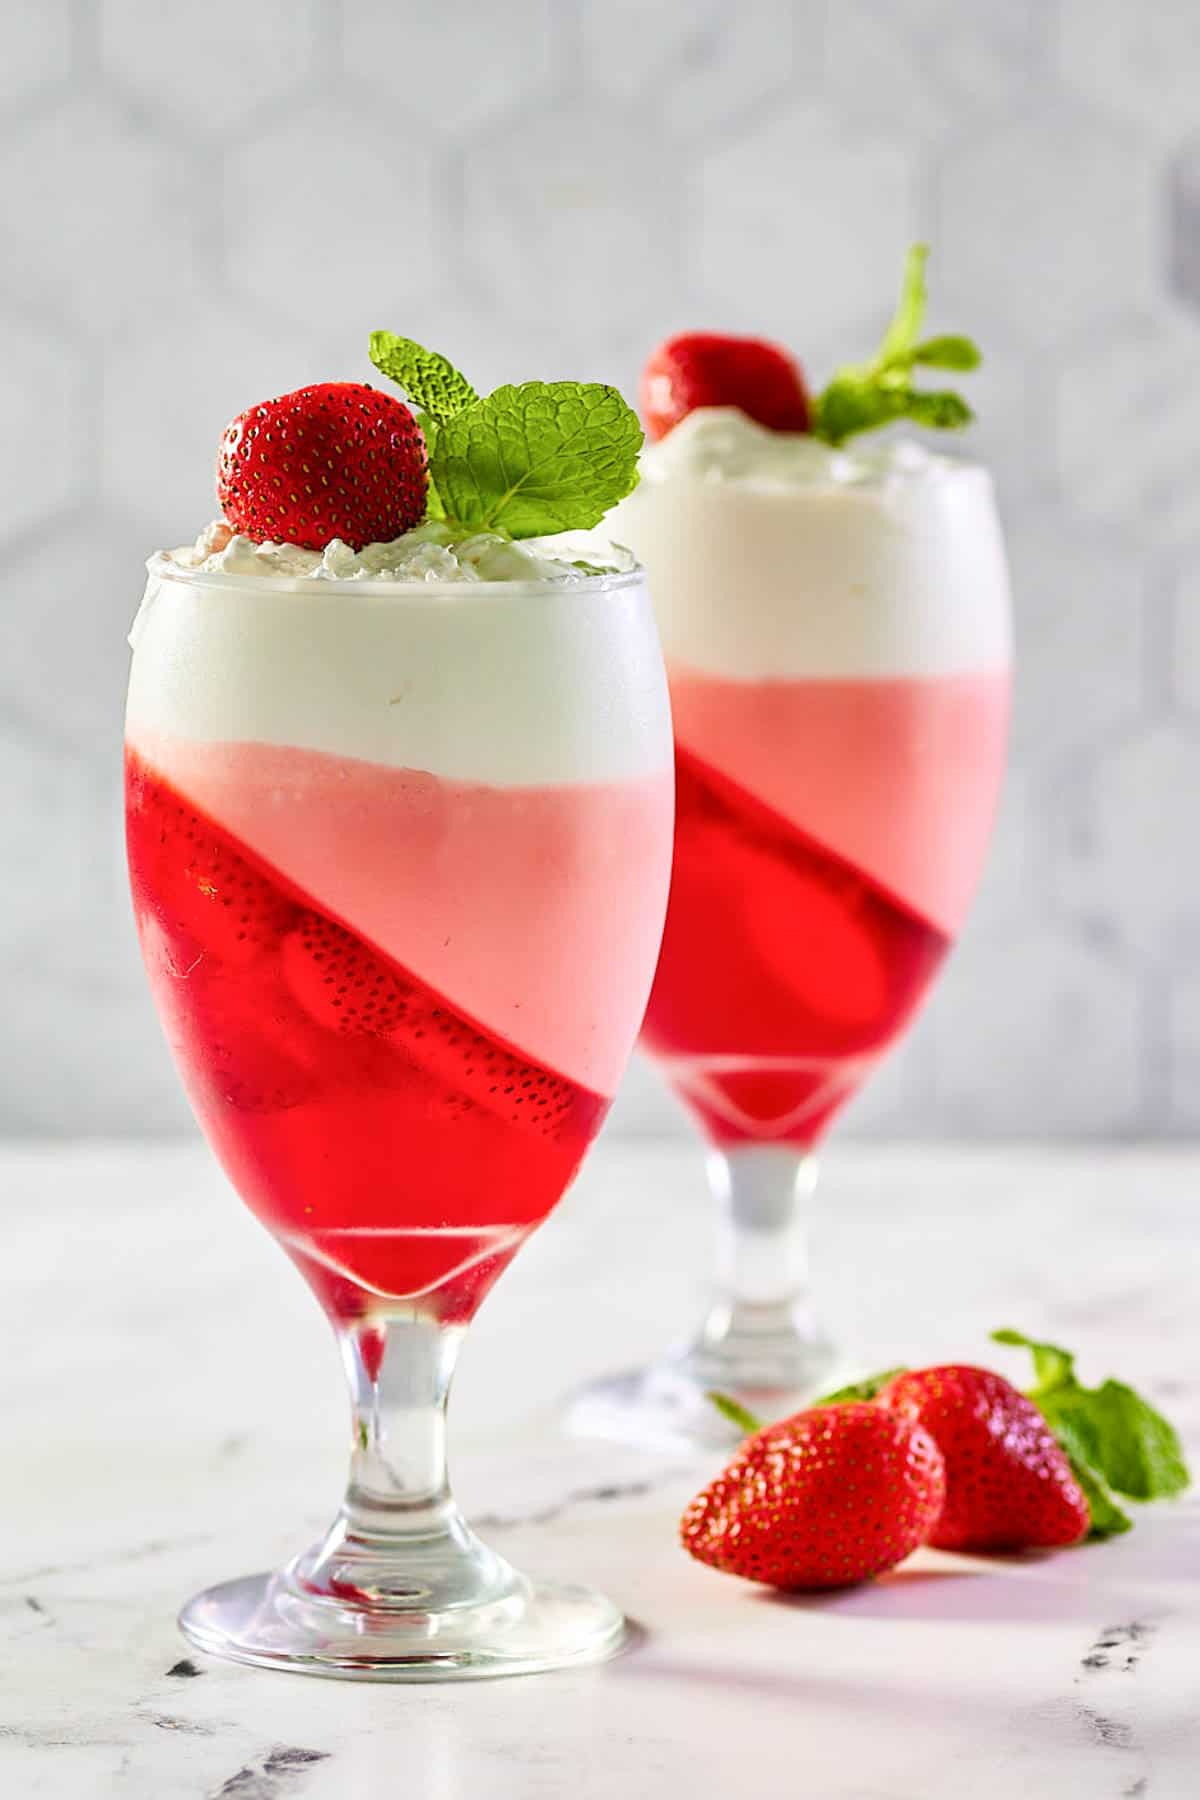 Strawberry jello parfait garnished with a whole strawberry and fresh mint.